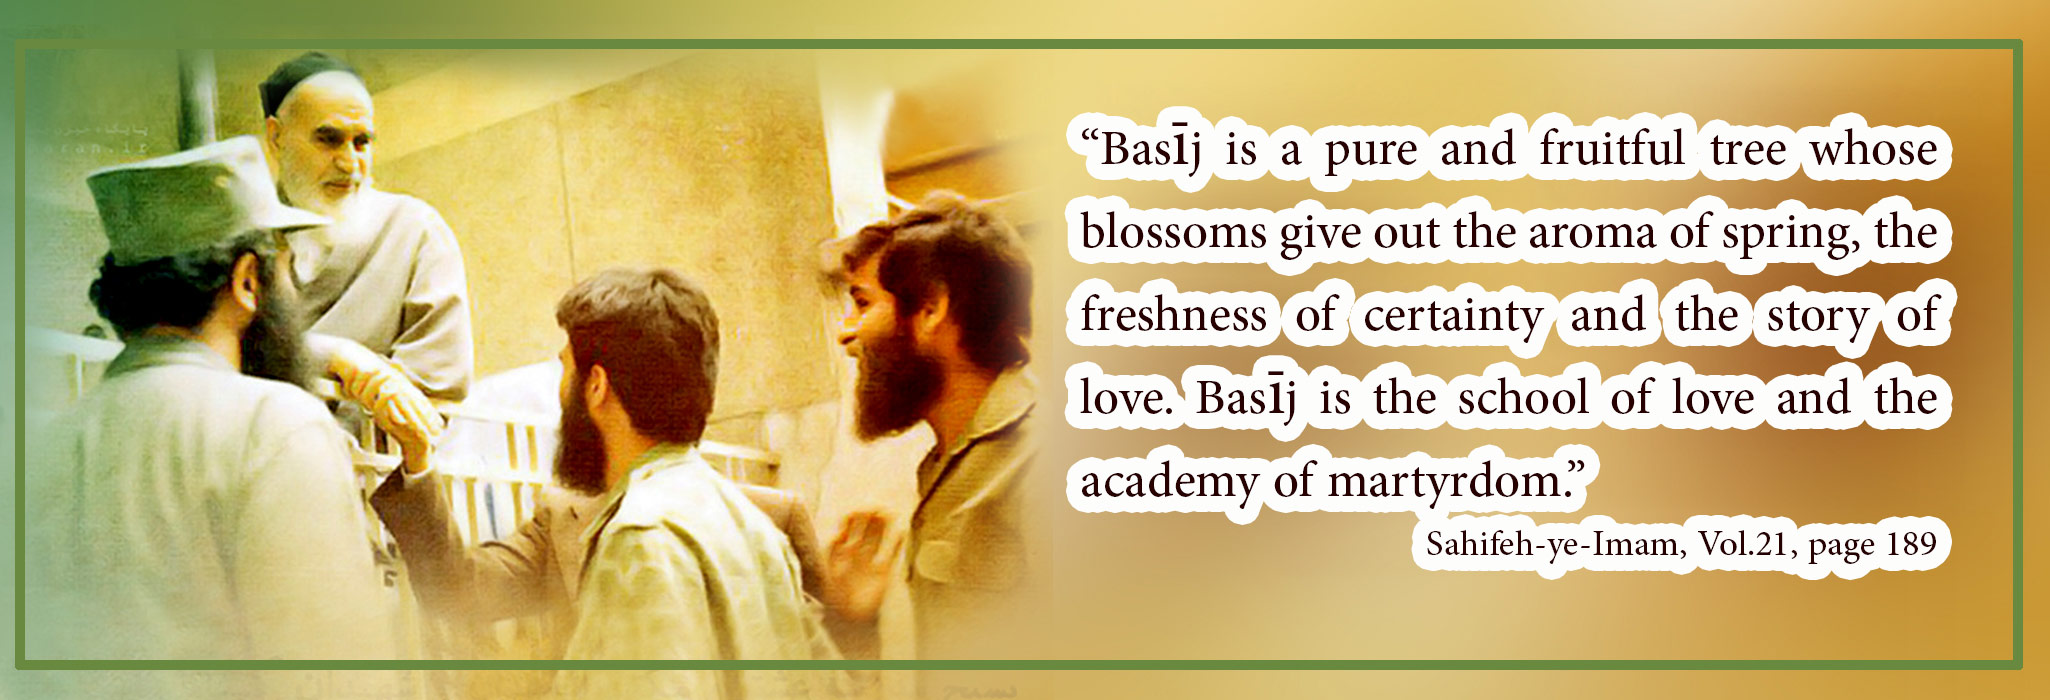 Basij is a pure and fruitful tree whose blossoms give out the aroma of spring, the freshness of certainty and the story of love. 